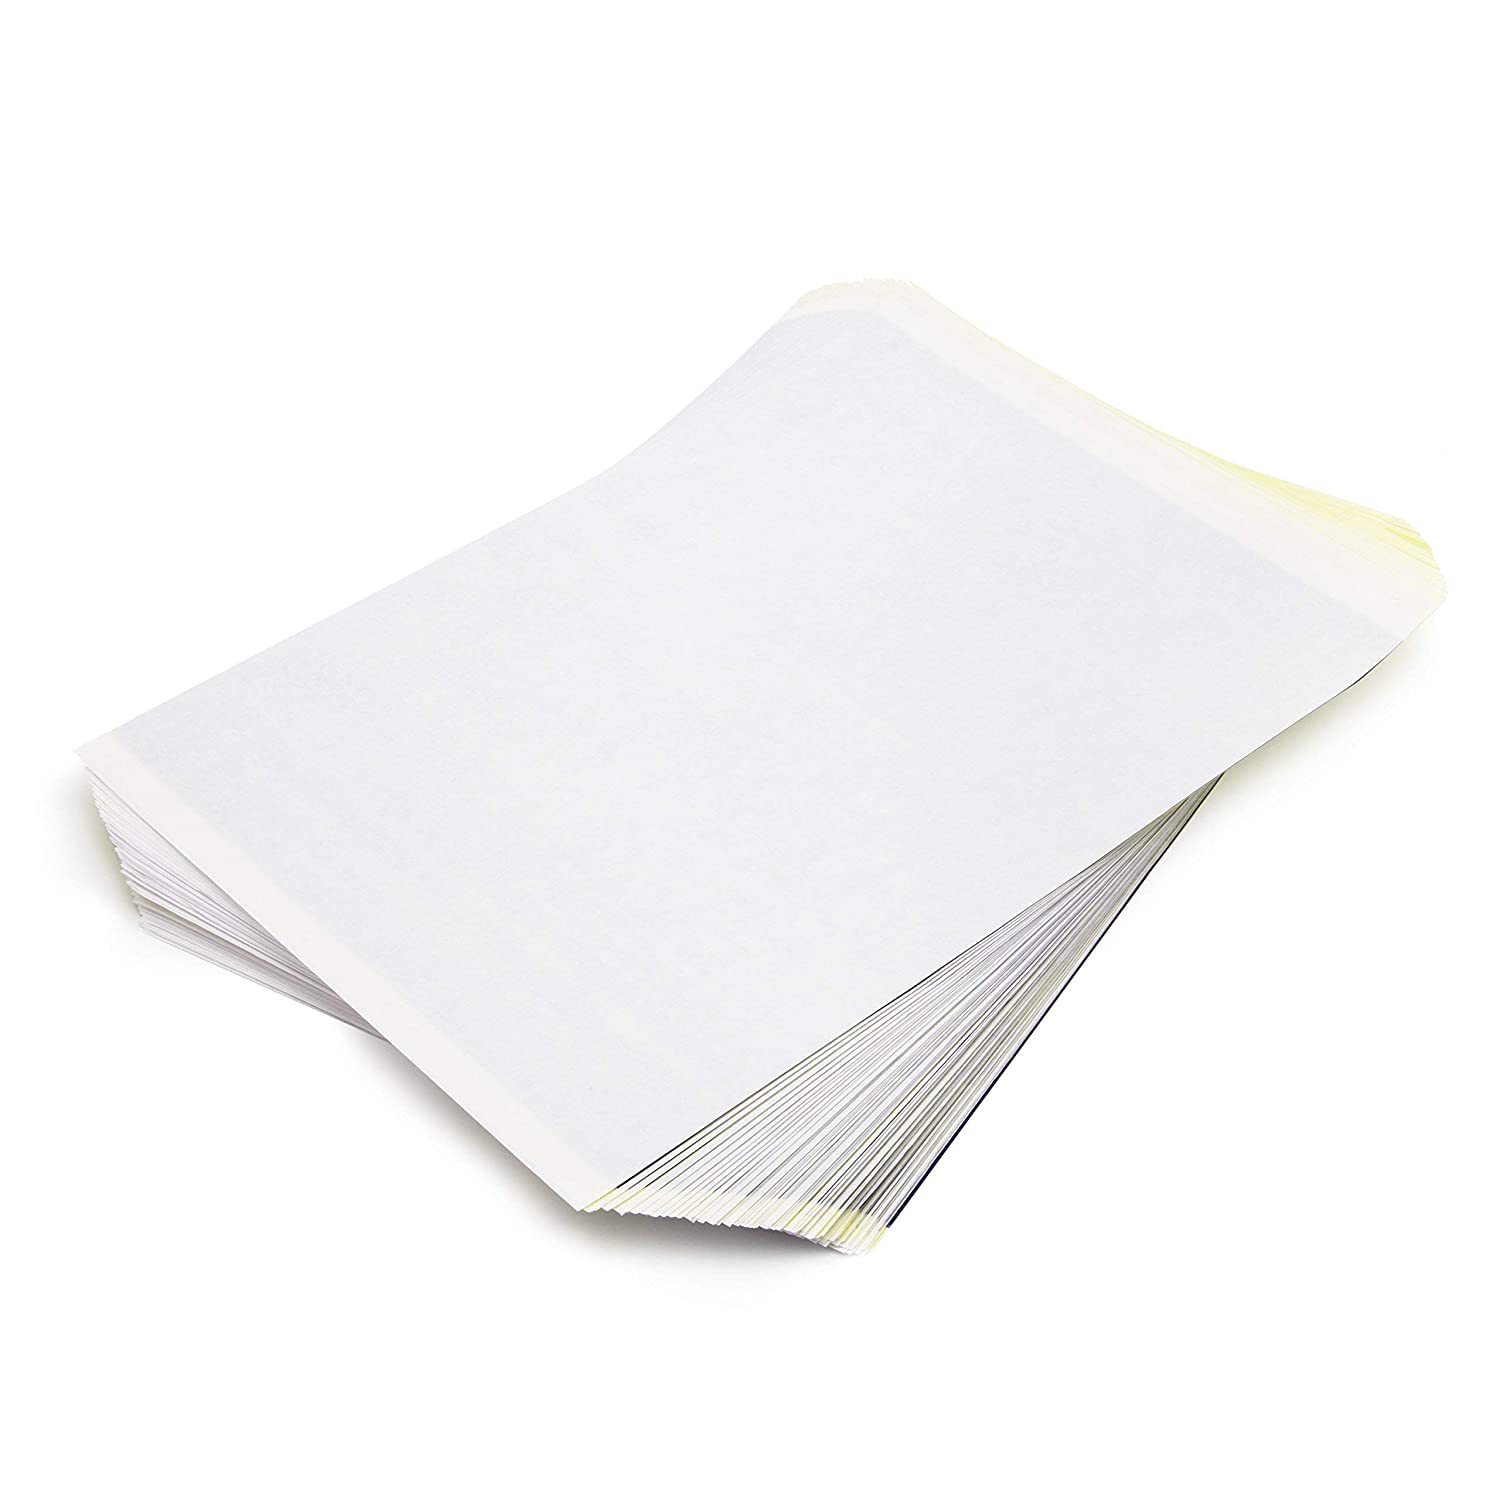 120 Sheets Tattoo Transfer Paper Stencil Paper for Tattooing 4 Layers Tattoo  Transfer Paper for Tattoo Supplies A4 Size